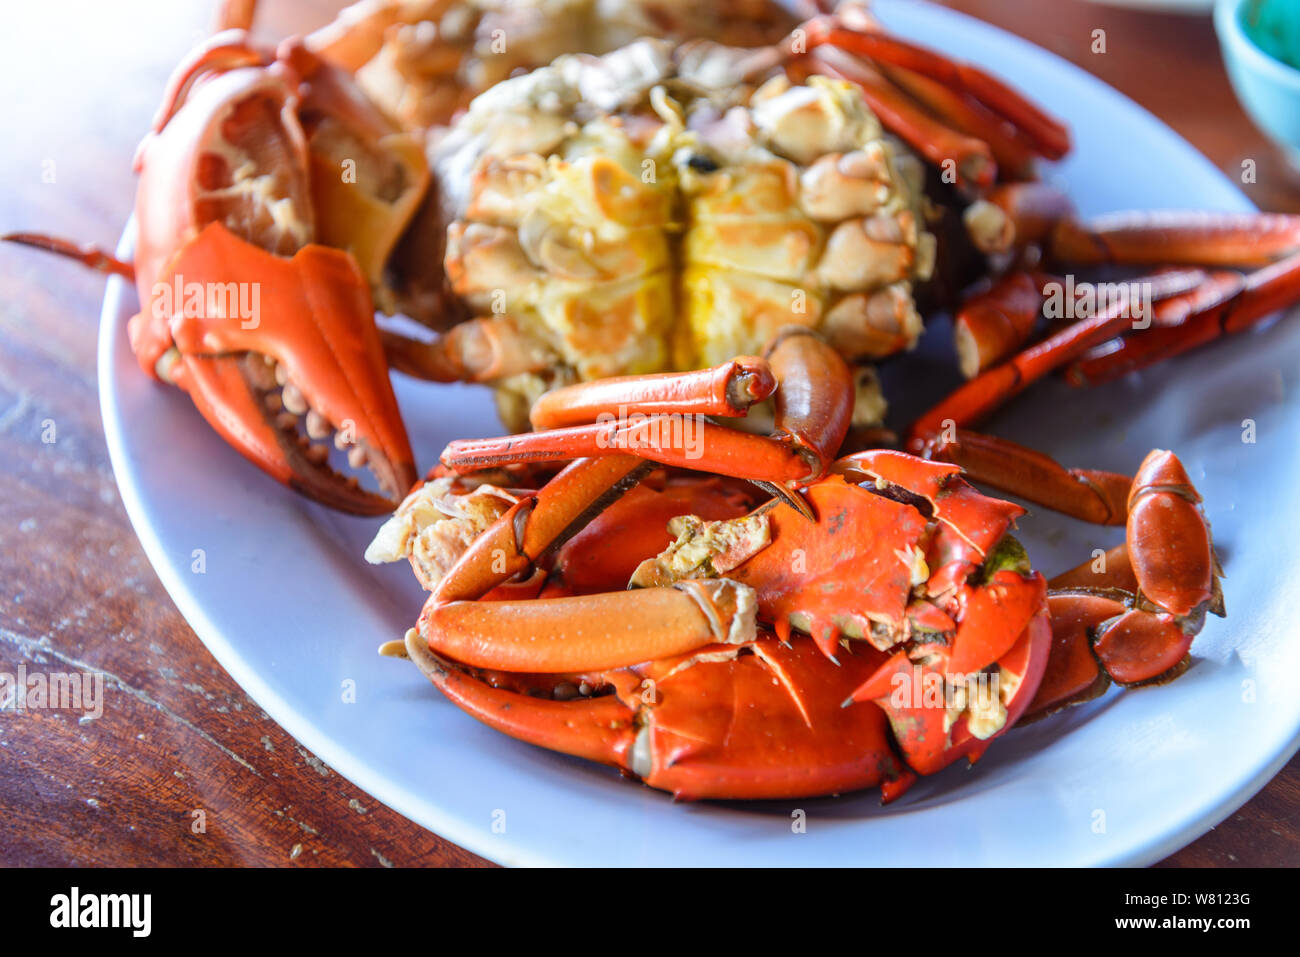 Fresh steamed or boiled crabs in plate on wooden table. Stock Photo